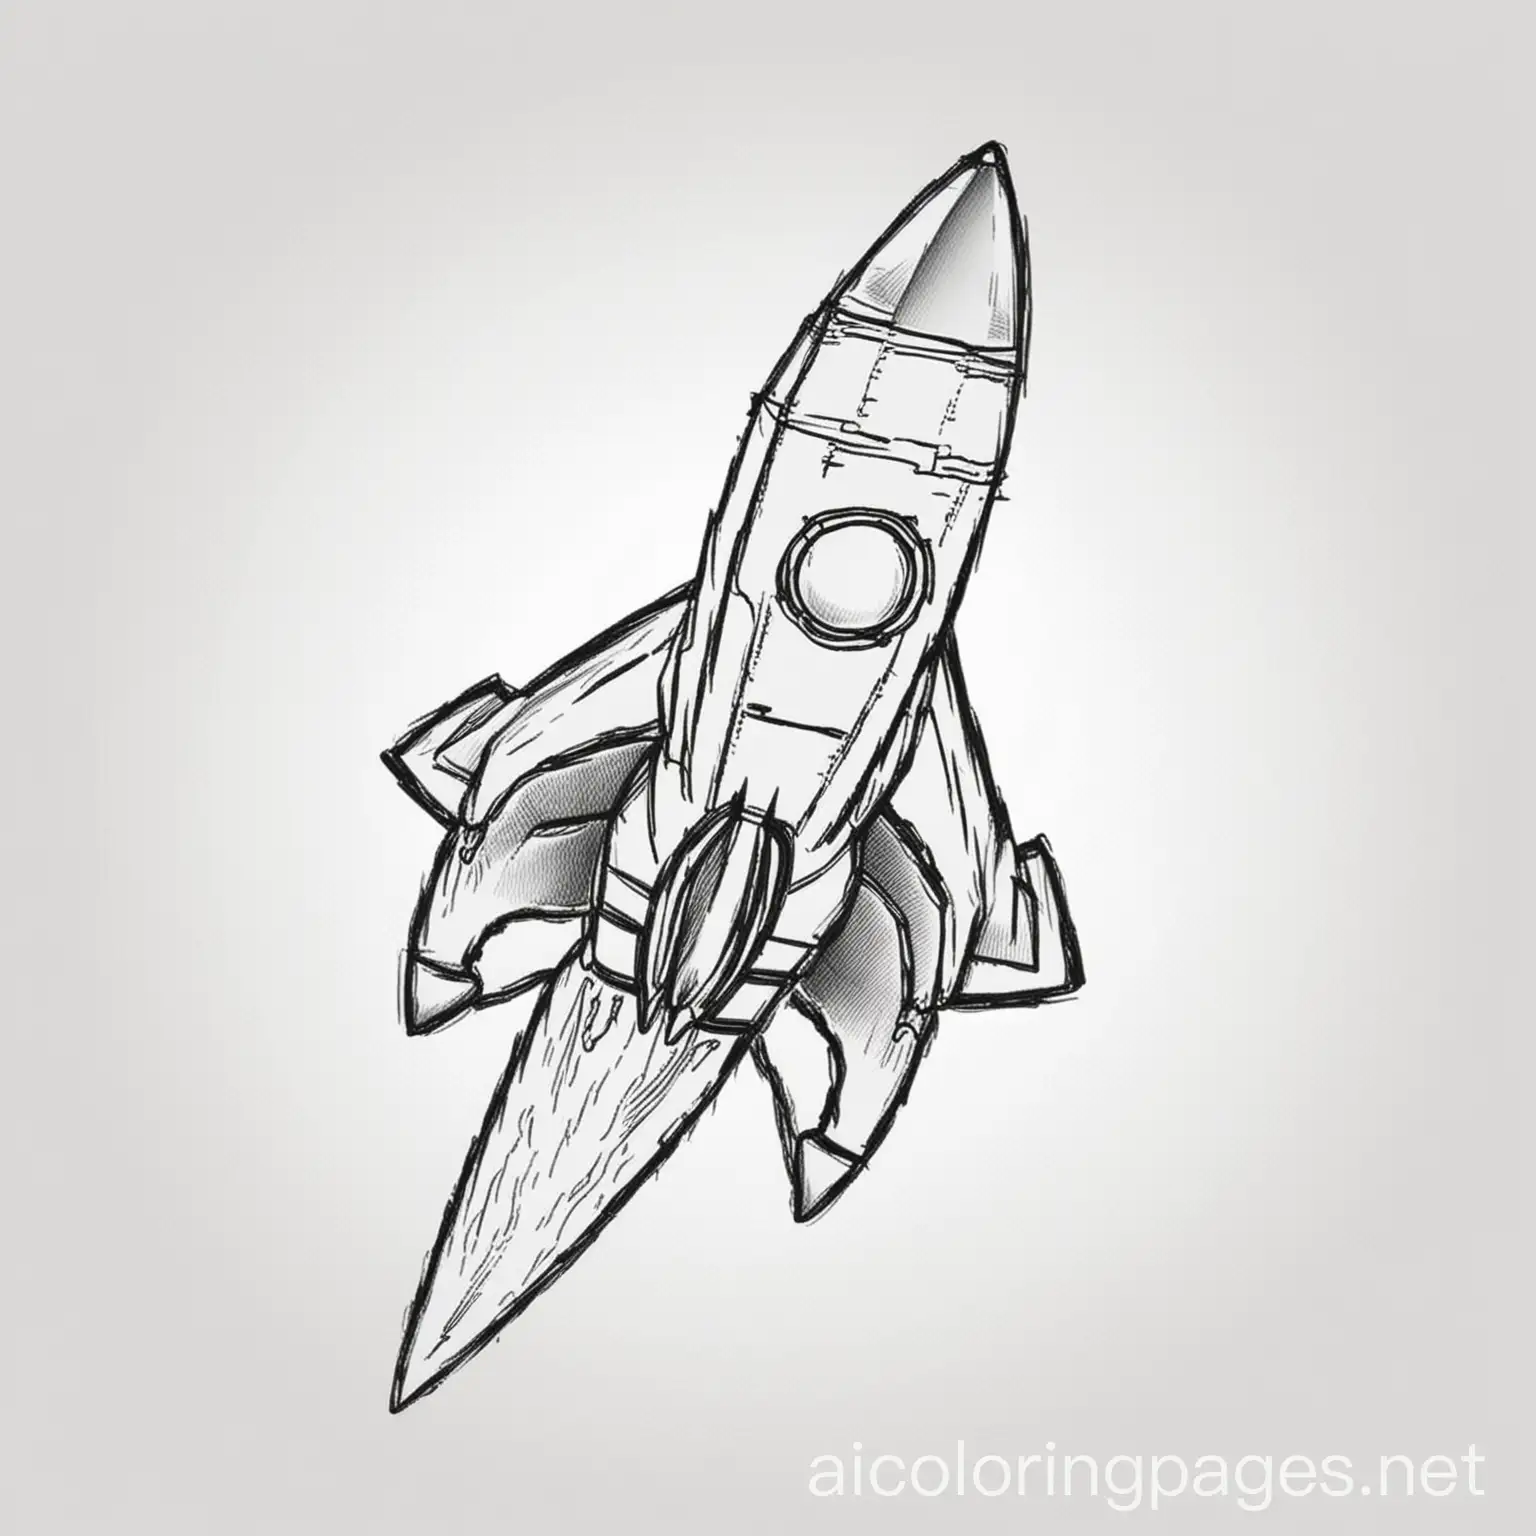 Rocket, Coloring Page, black and white, line art, white background, Simplicity, Ample White Space. The background of the coloring page is plain white to make it easy for young children to color within the lines. The outlines of all the subjects are easy to distinguish, making it simple for kids to color without too much difficulty